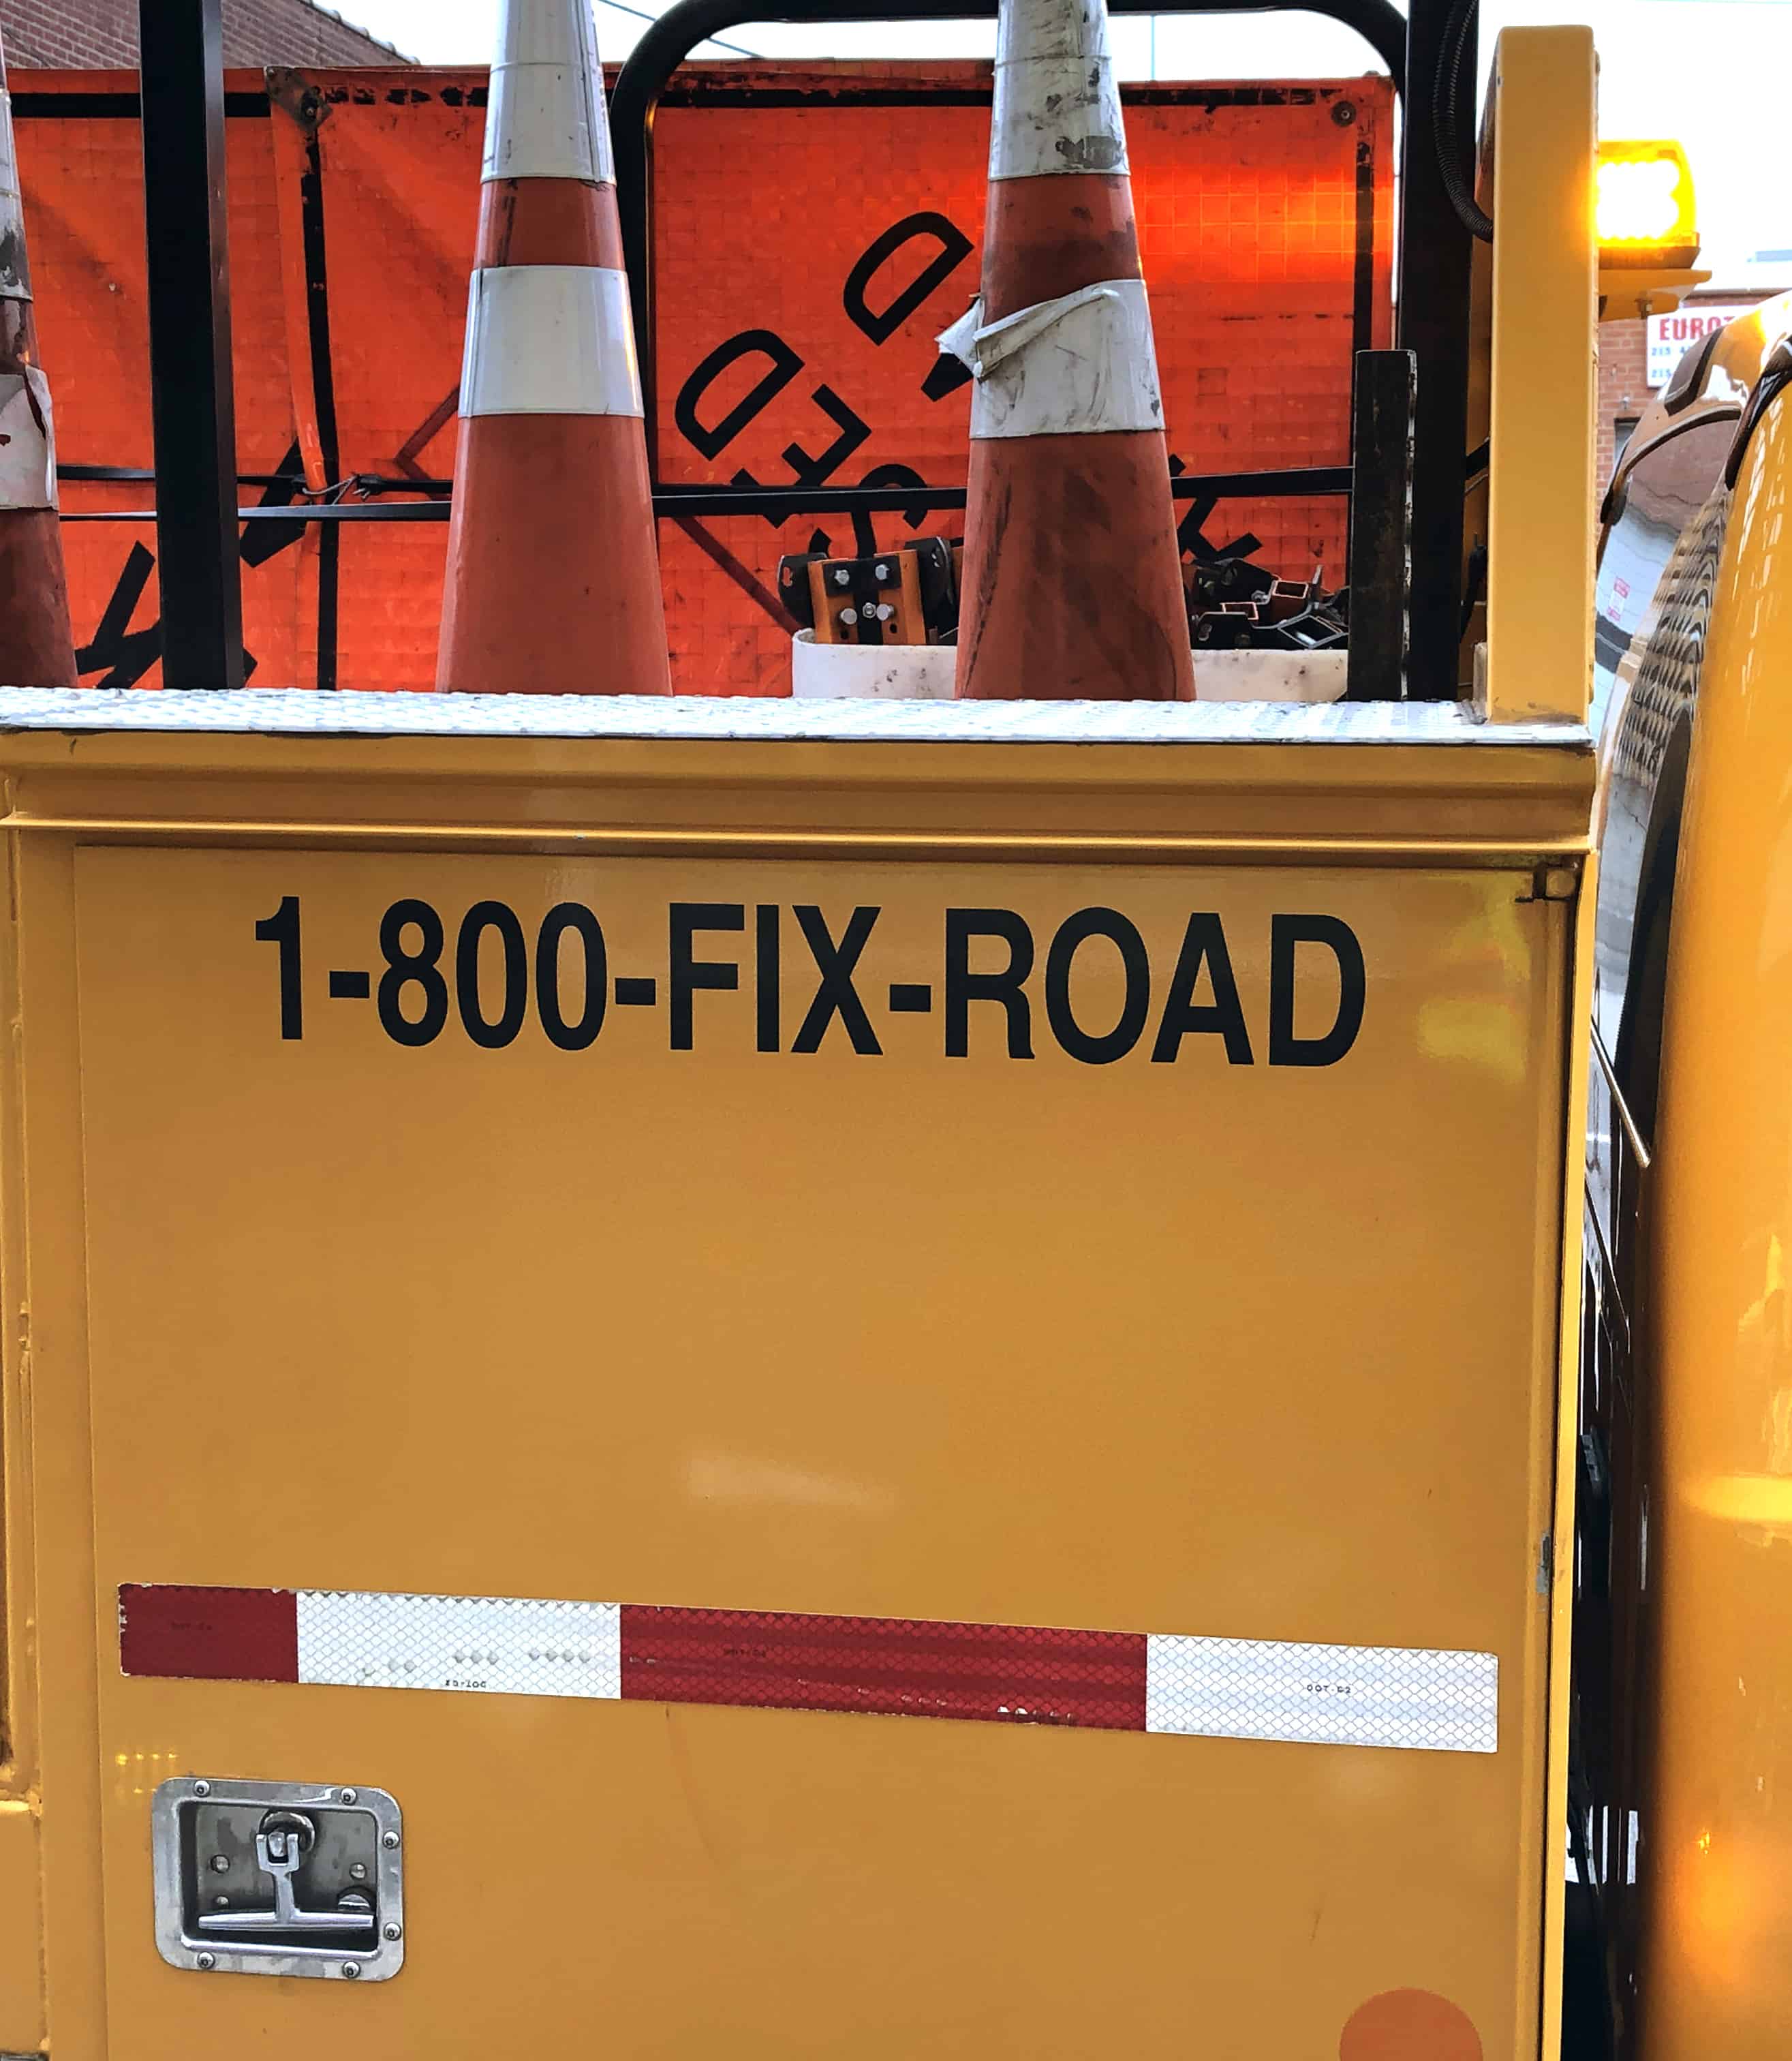 The side of a yellow PennDOT truck with the words 1-800-FIX-ROAD.